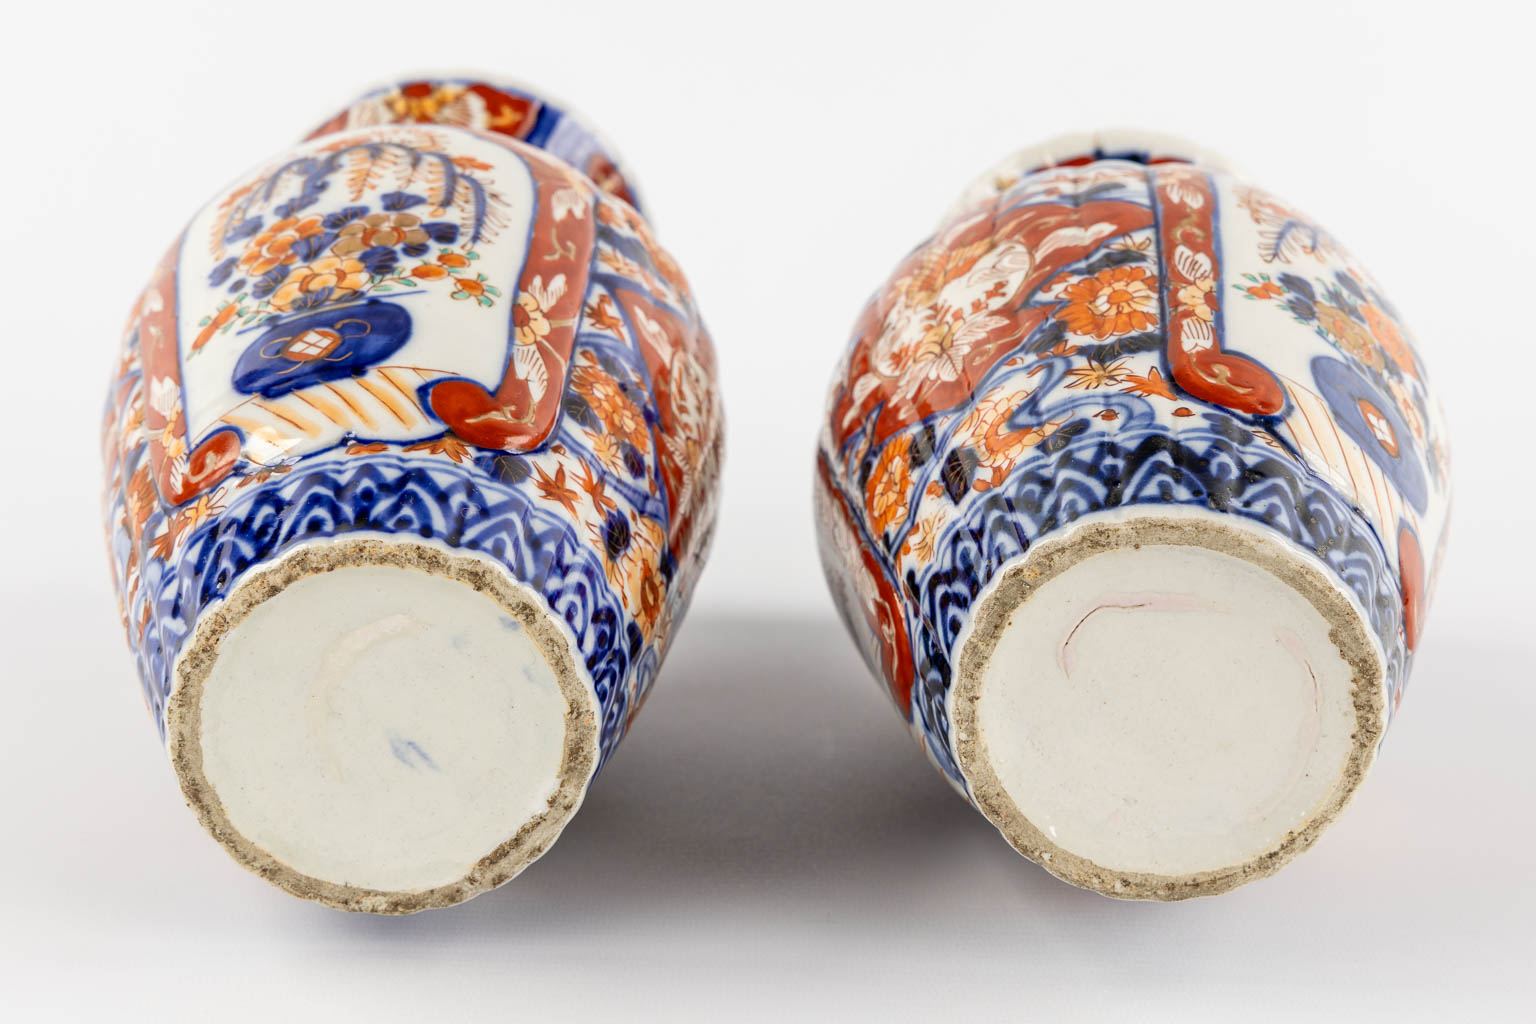 A pair of vases and a bowl, Japanese Imari porcelain. (H:25 x D:14 cm) - Image 7 of 11